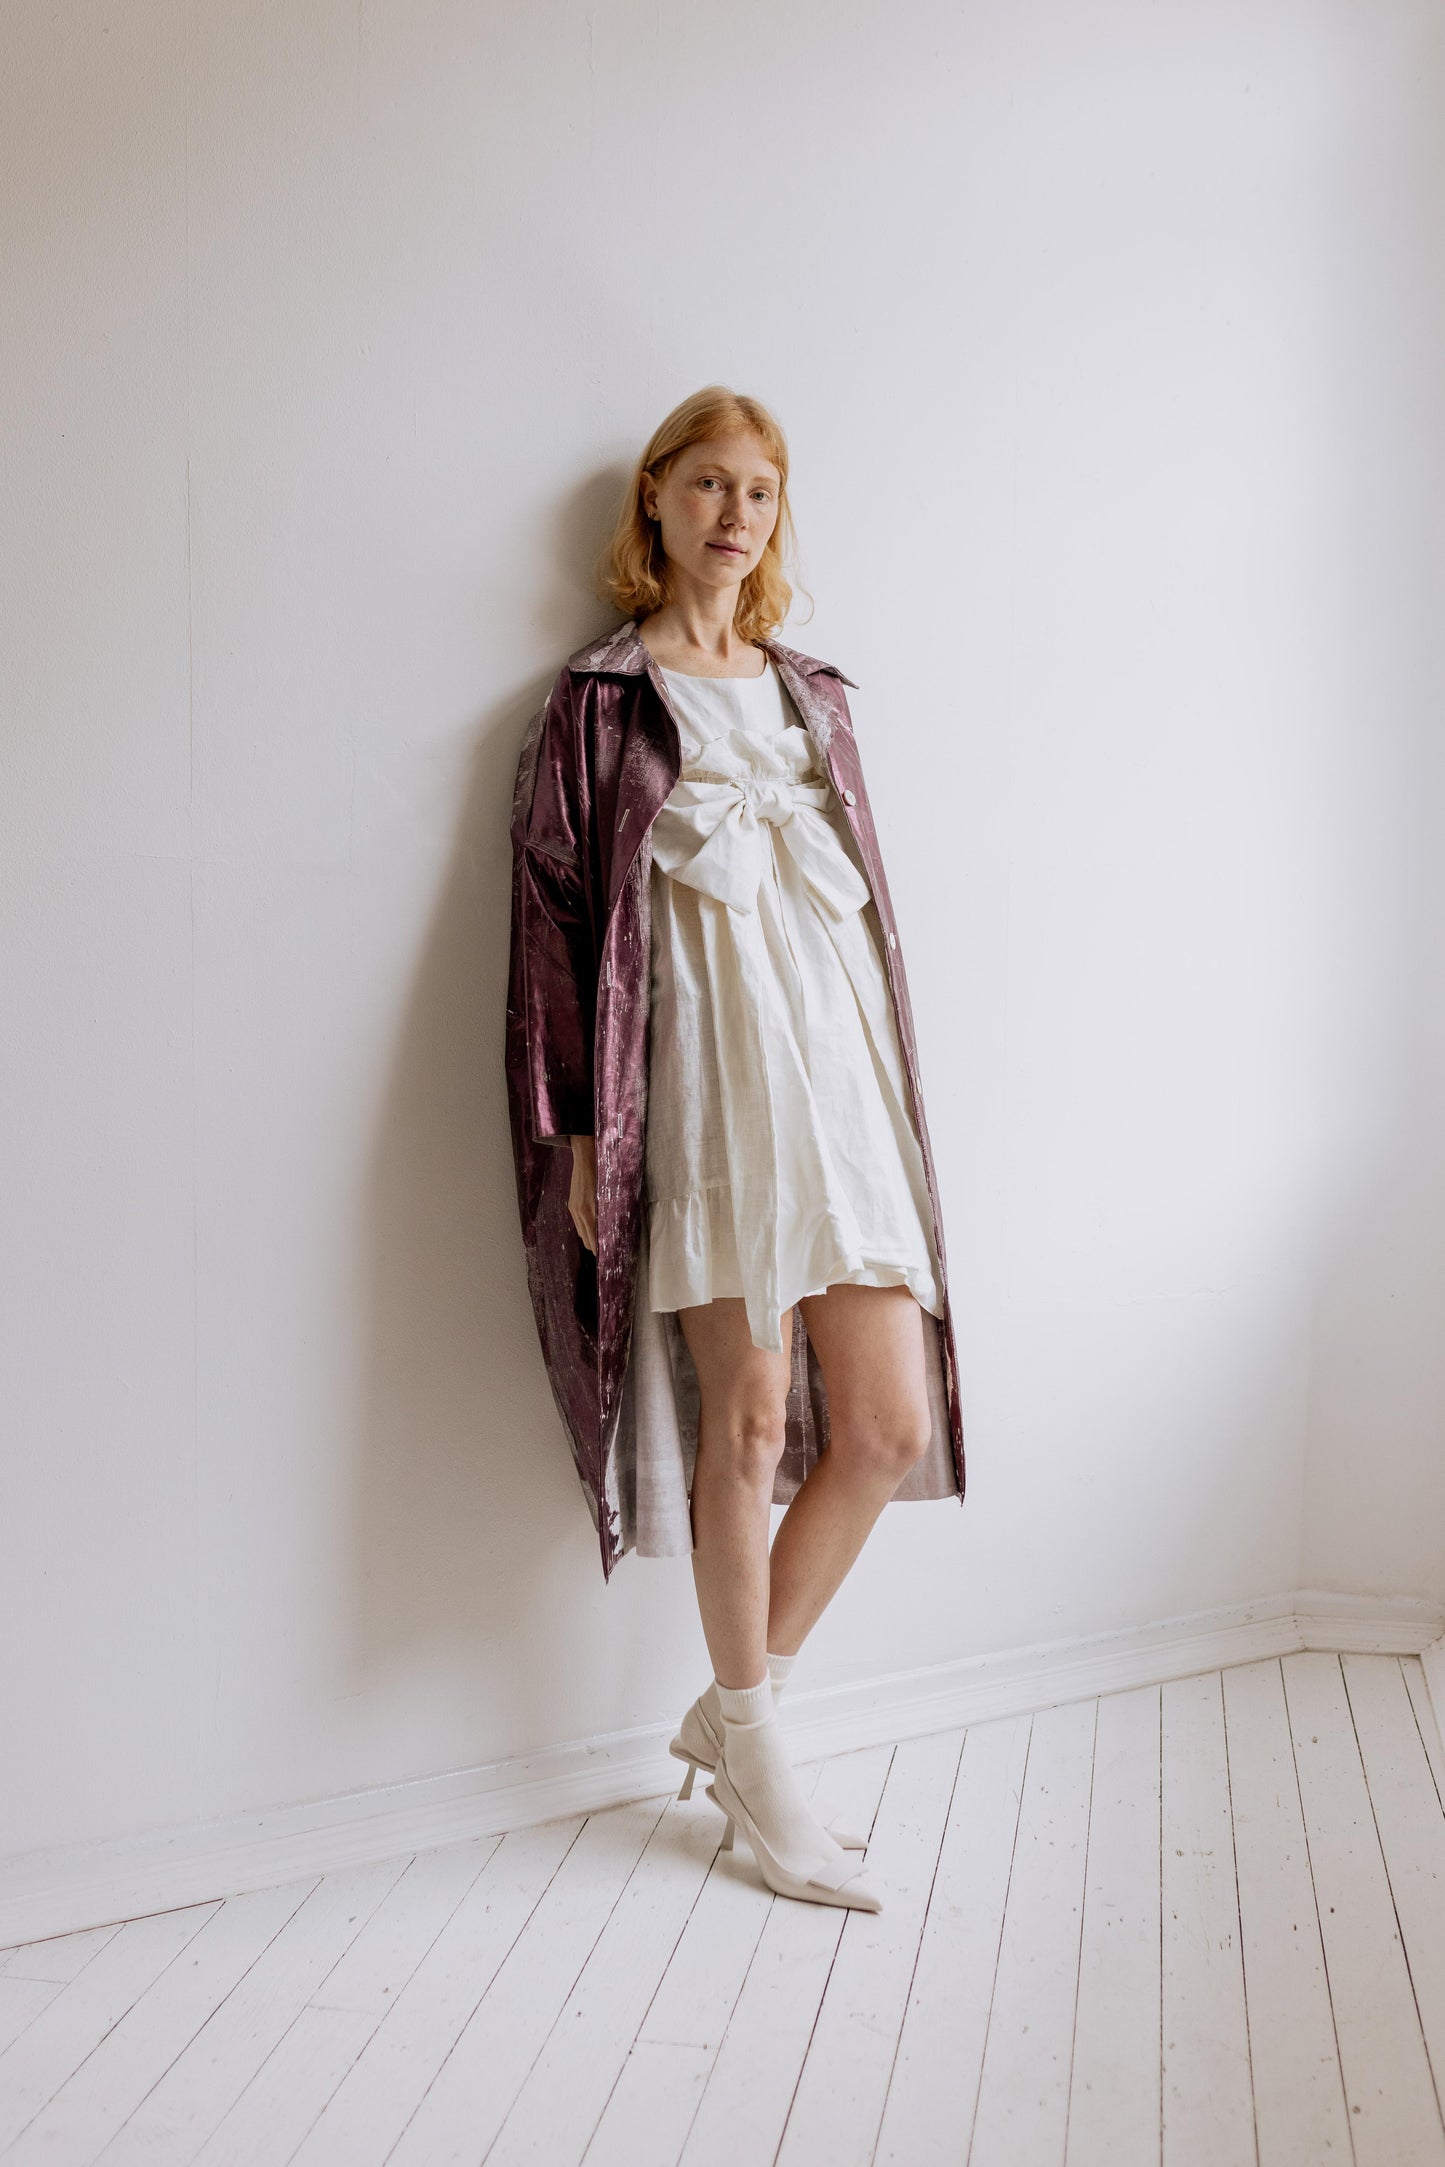 MINI BOW DRESS - PEARL | A new shape for AW23, The Bow Dress is one of our most playful. The dress is an oversized shape with gathered tiered details. The frill and bow detail at the front is the show-stopper. Cut in an oversized shape - you can wear her